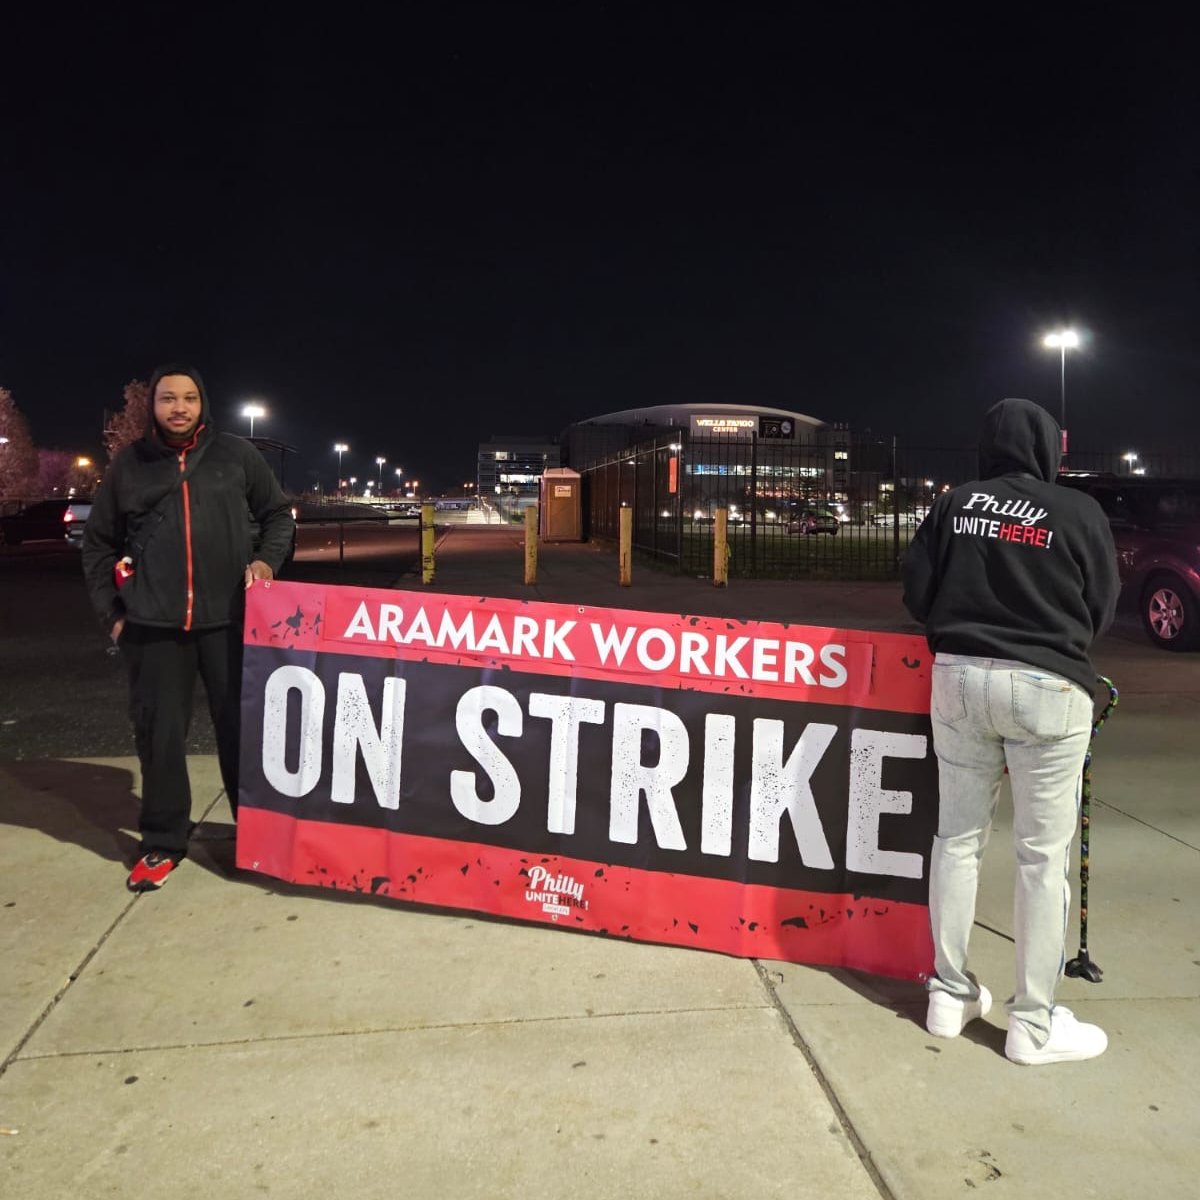 Support our strike: Enjoy your event. Eat Elsewhere. Do Not Patronize Aramark. No Food, No Drinks. Tons of Solidarity.